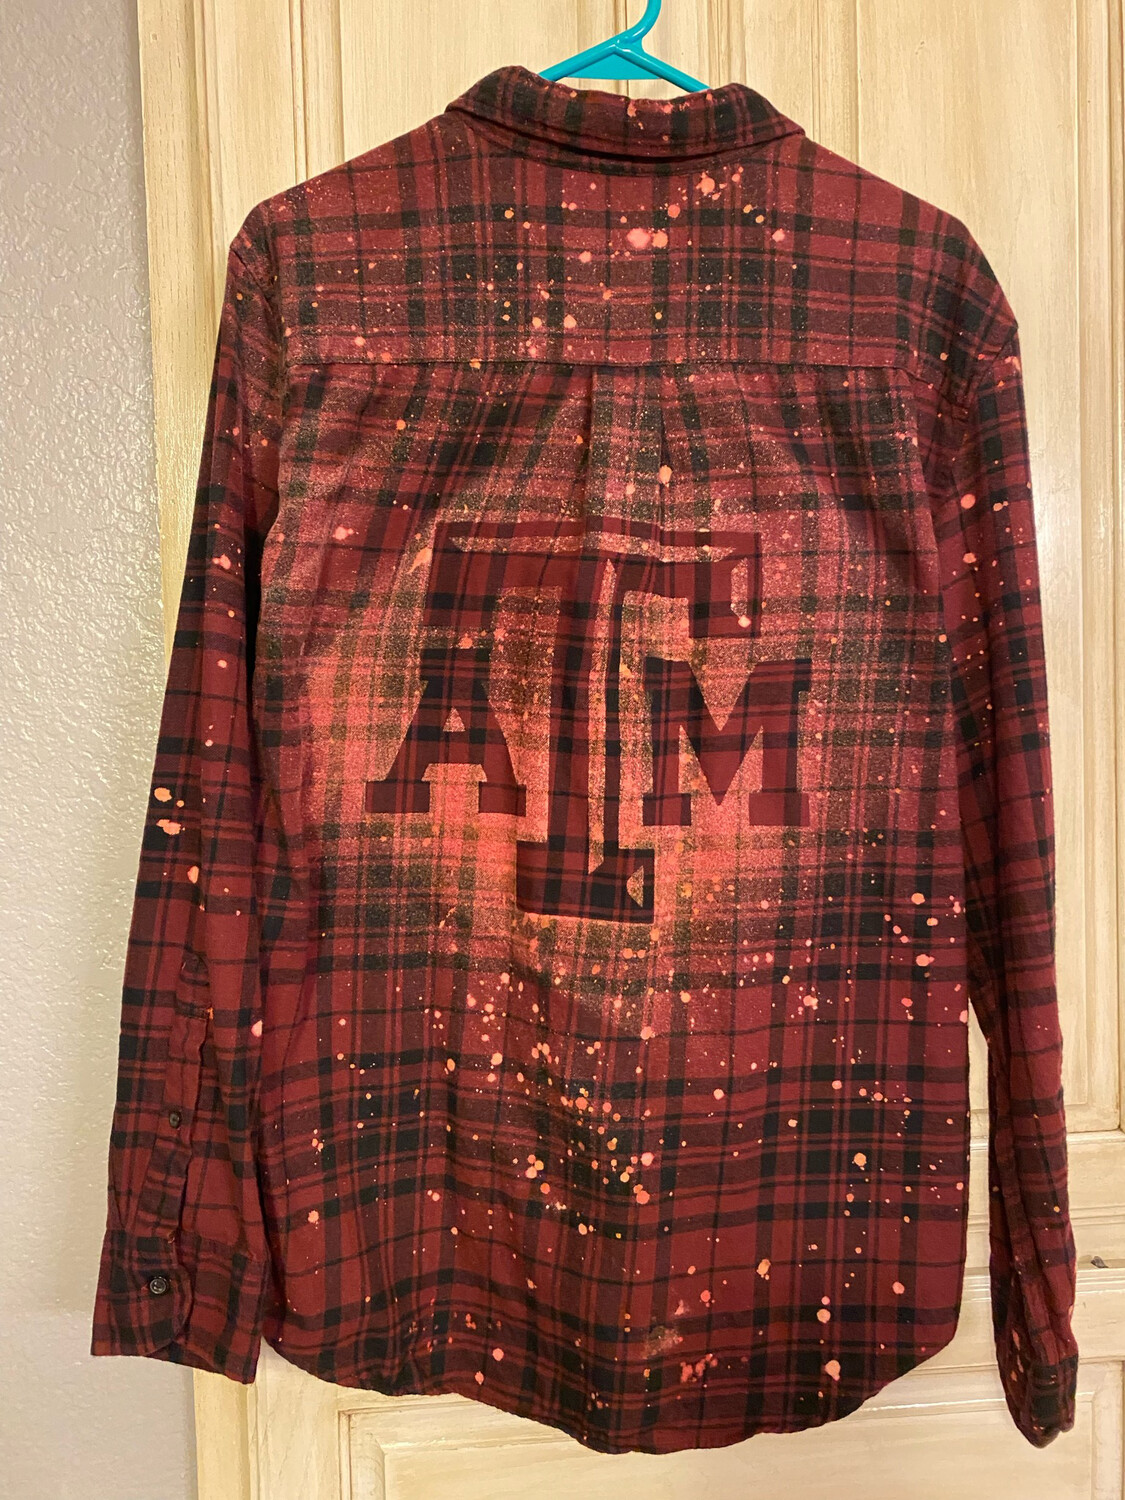 ATM - Bleached Flannel Shirt - Large